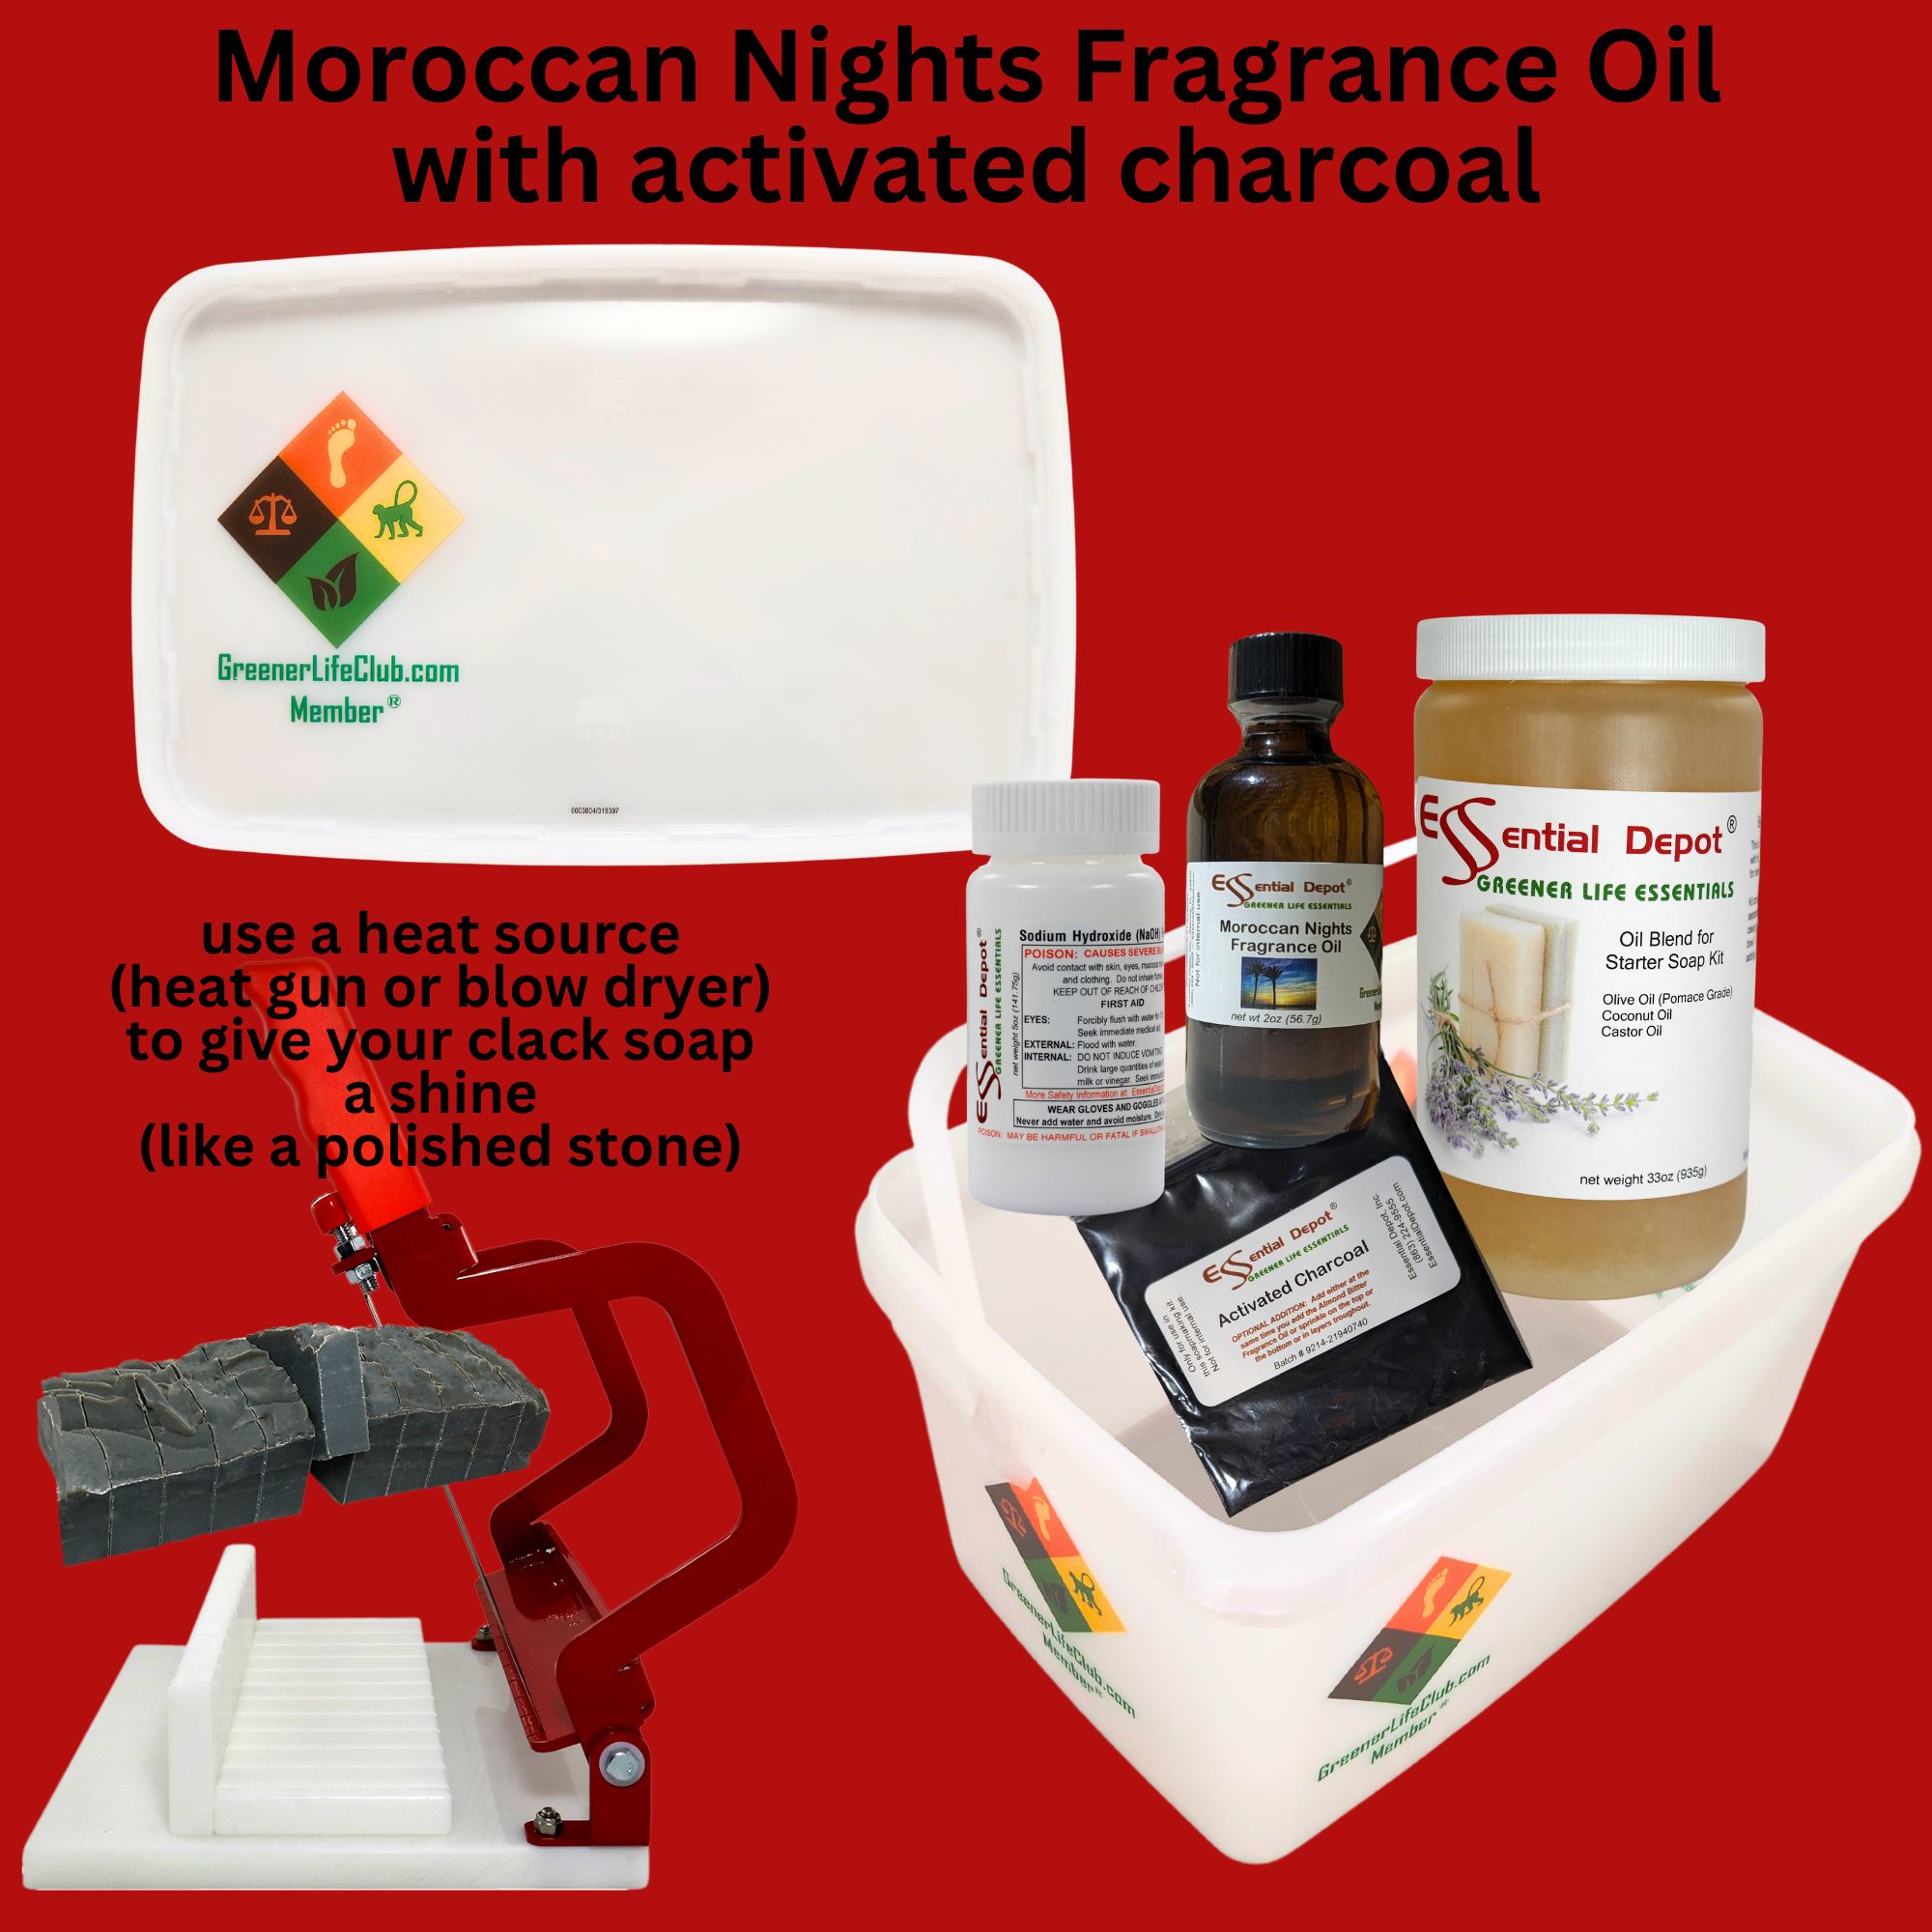 Moroccan Nights Fragrance Oil with Activated Charcoal